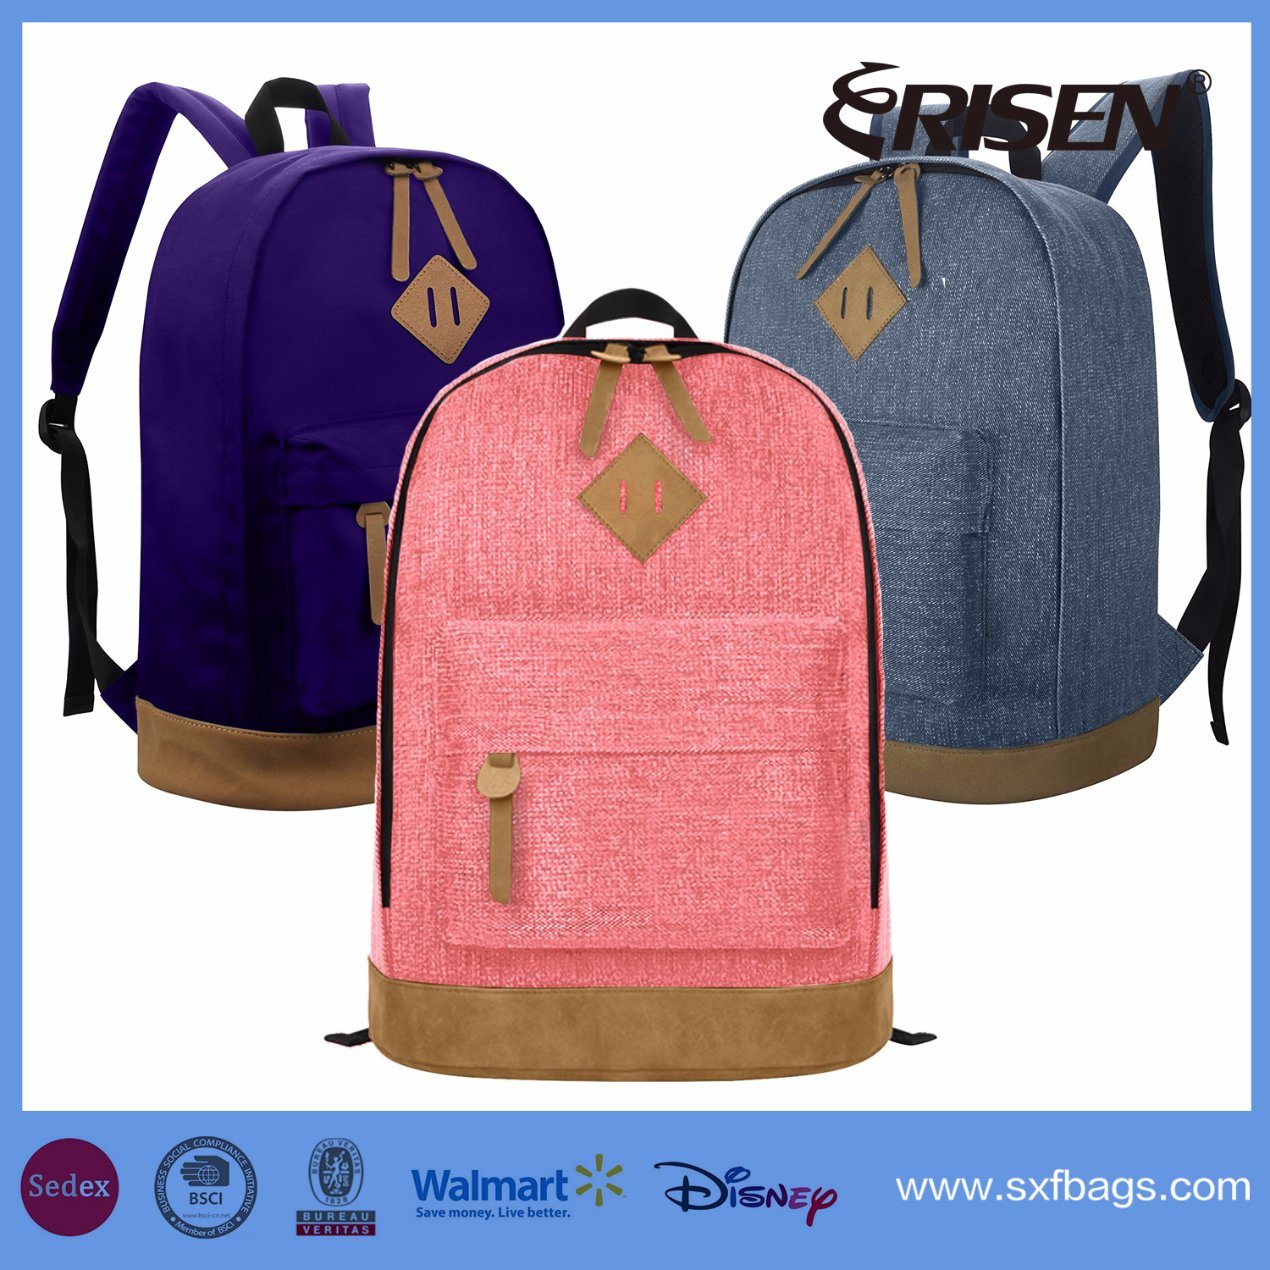 Classic Travel Laptop Backpack Bag for School